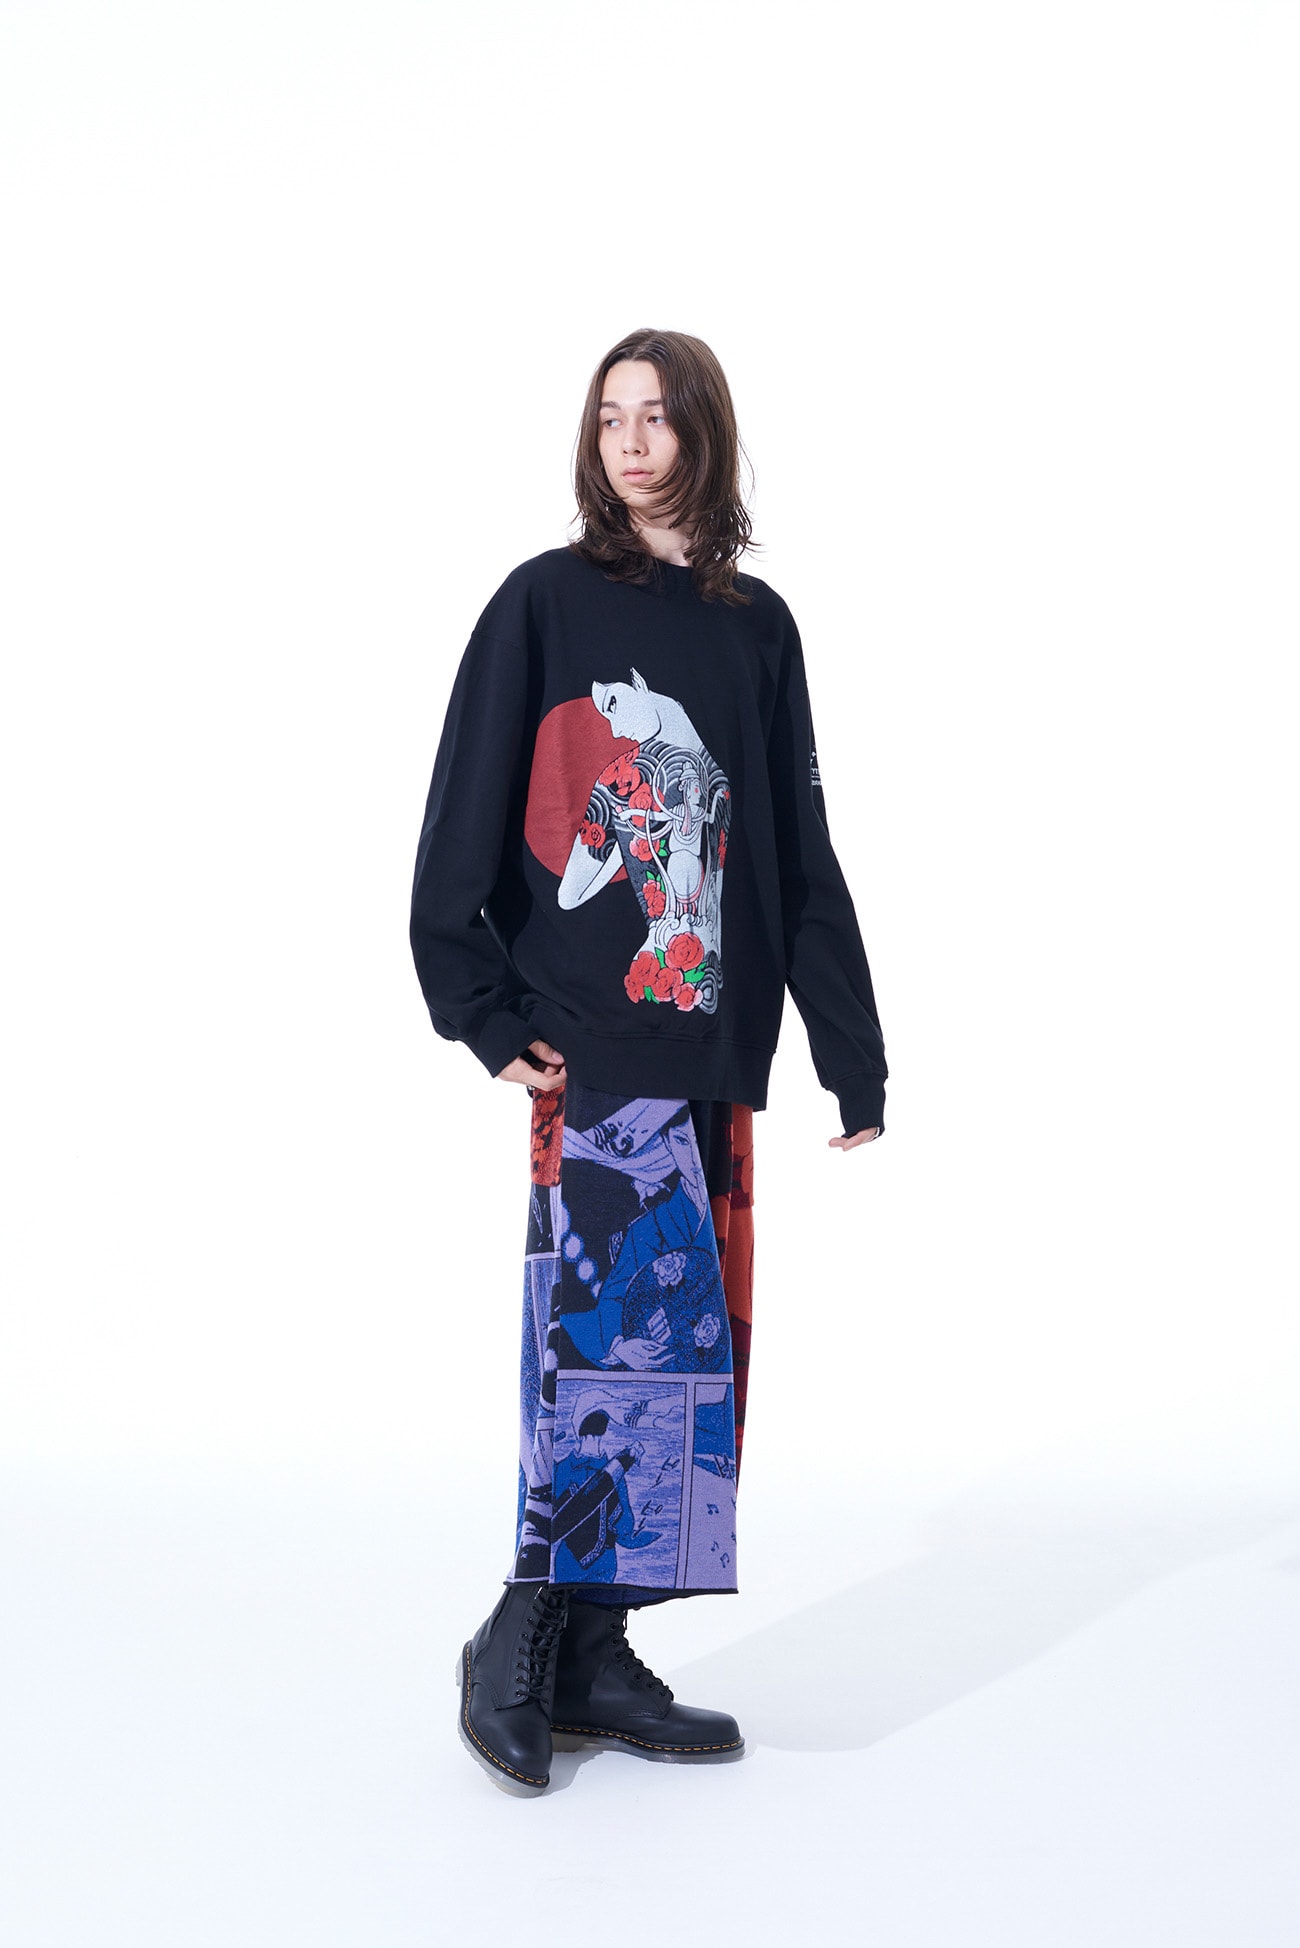 S'YTE x KAZUO KAMIMURA-TATTOO and WOMAN-FRENCH TERRY SWEAT SHIRT WITH PRINTED ILLUSTRATION